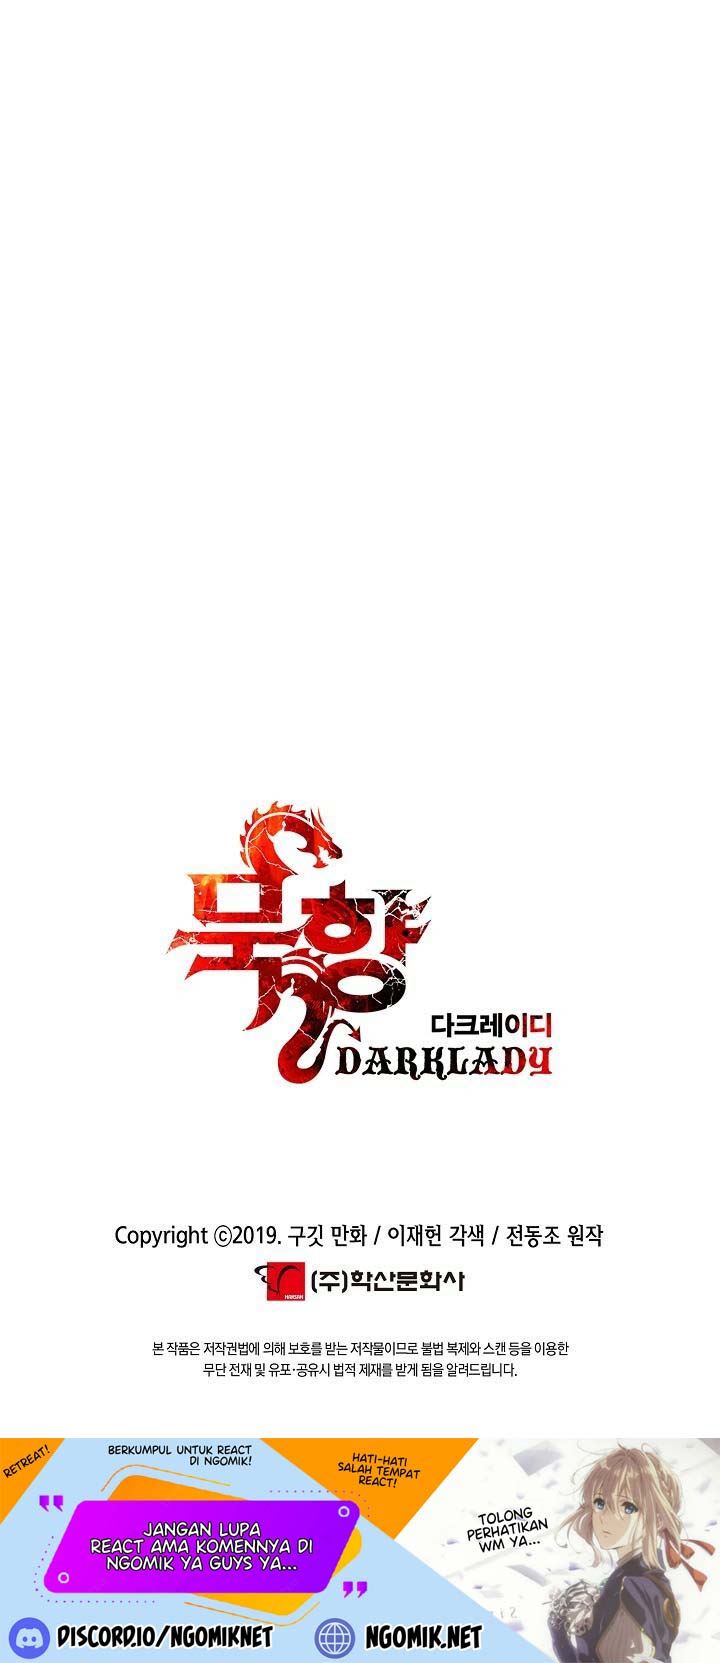 MookHyang – Dark Lady Chapter 109